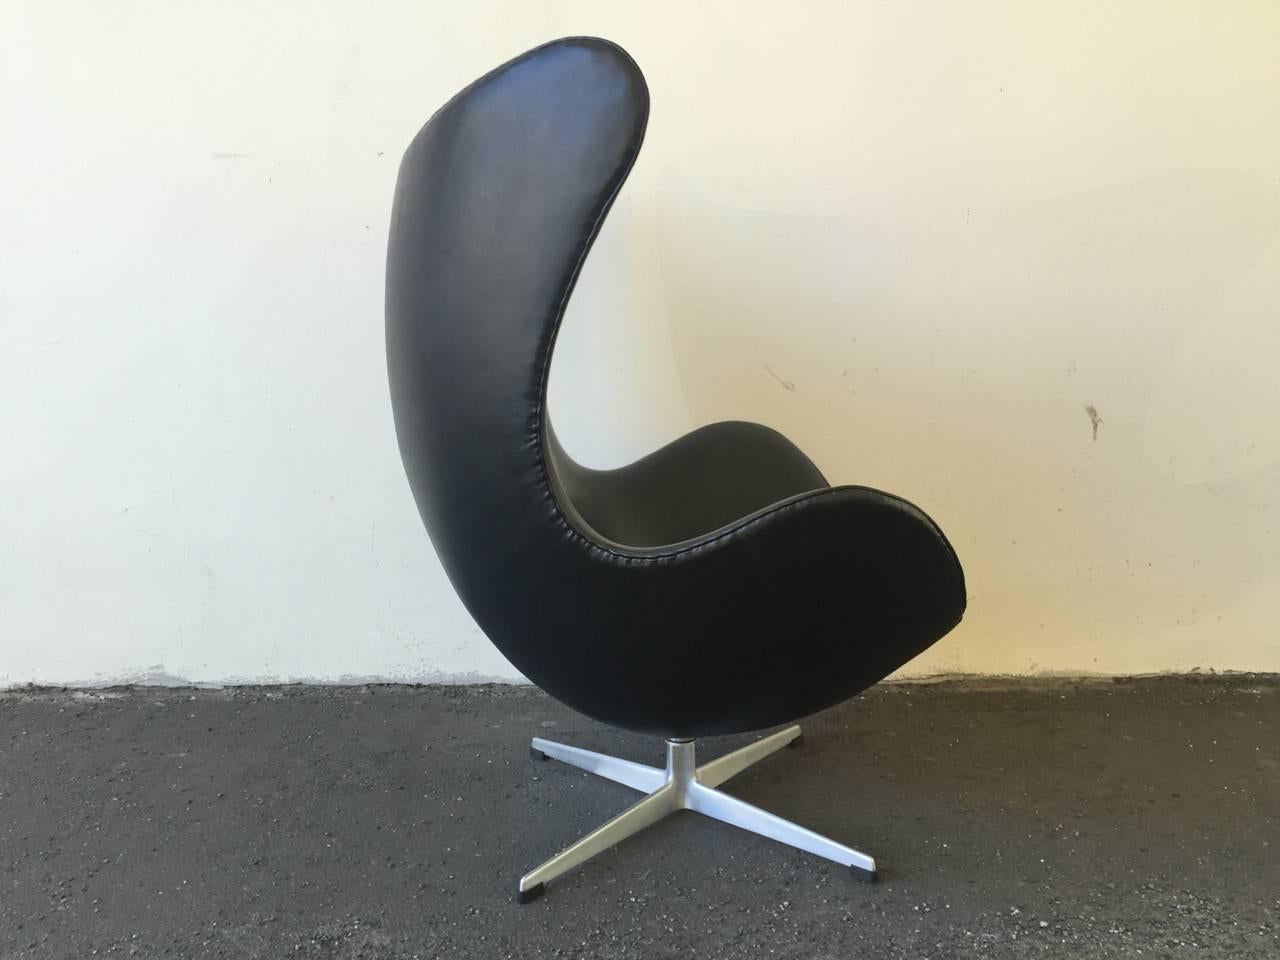 First edition Arne Jacobsen egg chair in good original condition. Original upholstery in black leatherette. Original foam in good condition.